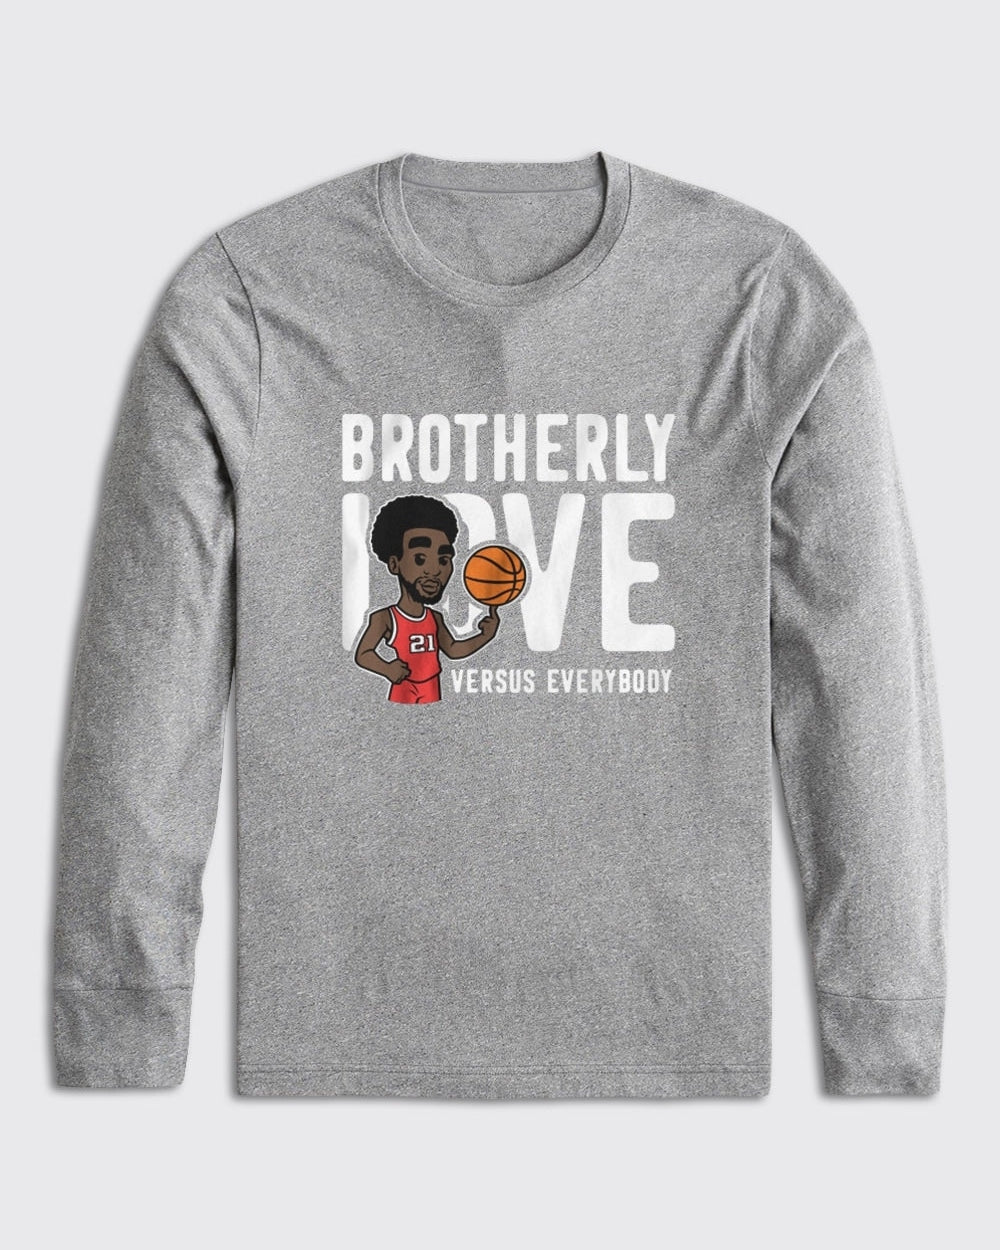 Philly Sports Shirts Brotherly Love Vs Everybody Hoodie L